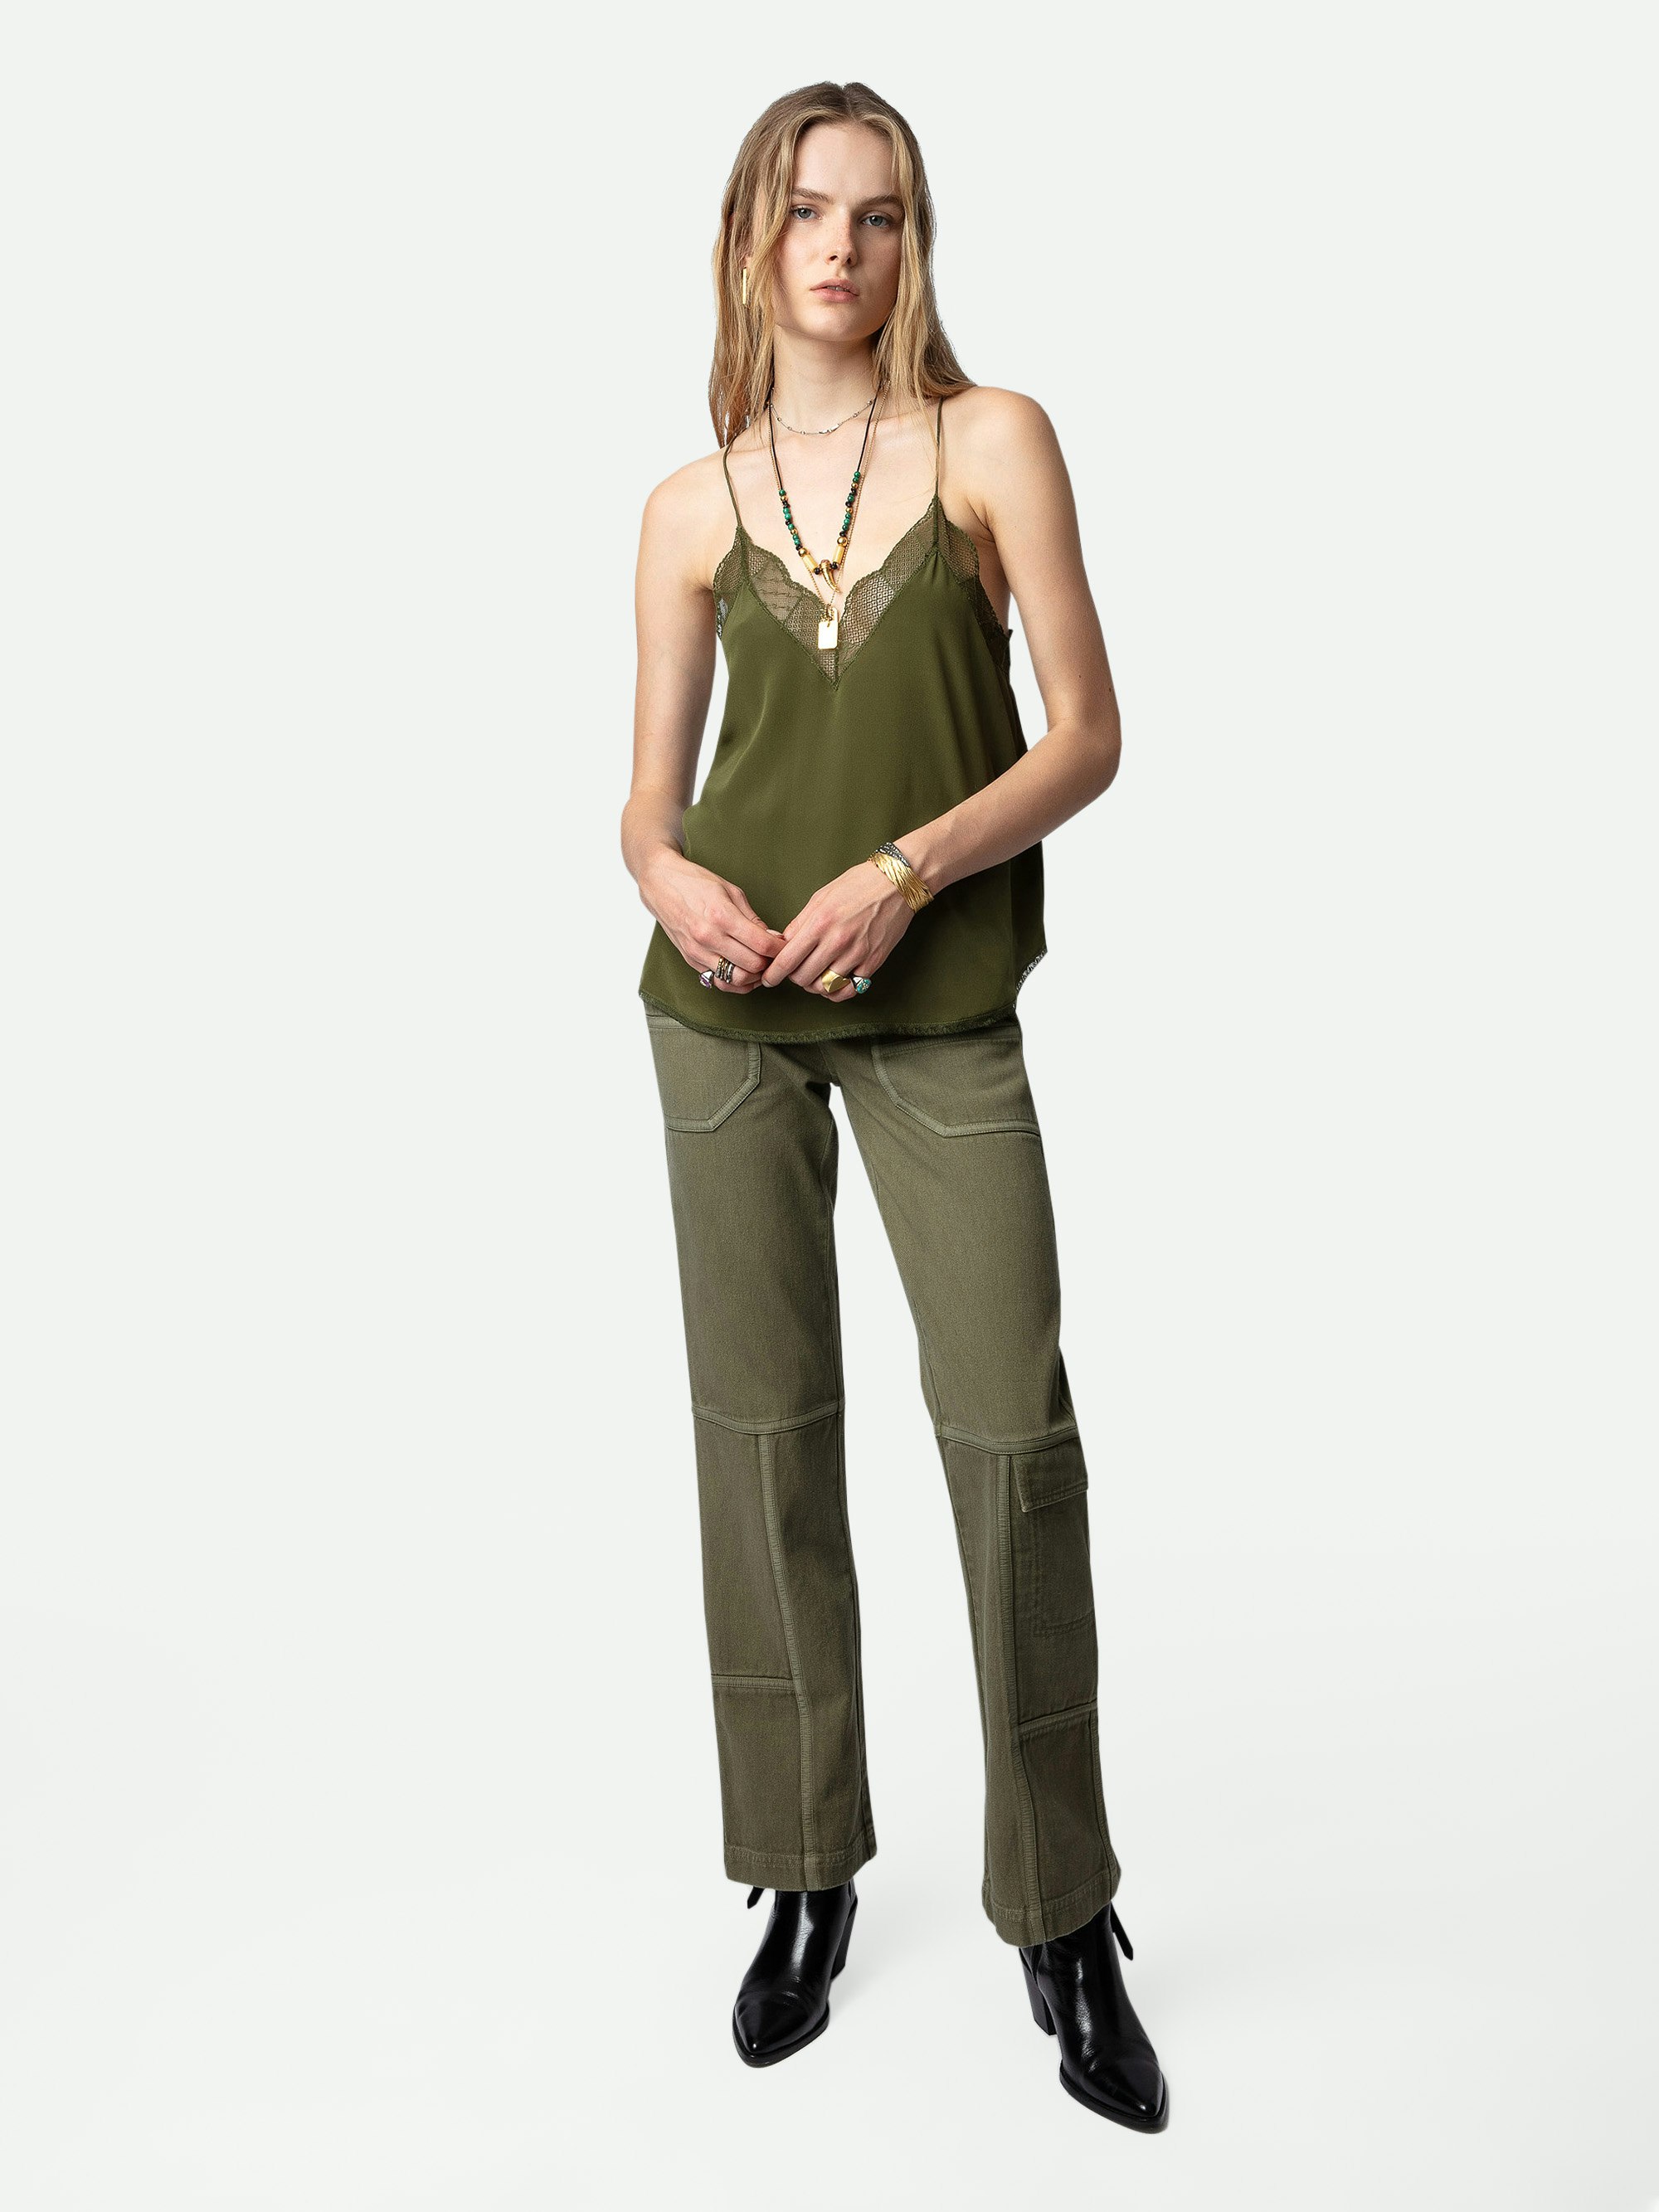 Christy Silk Camisole - Khaki silk lingerie-style camisole with thin straps and lace-trimmed neckline.